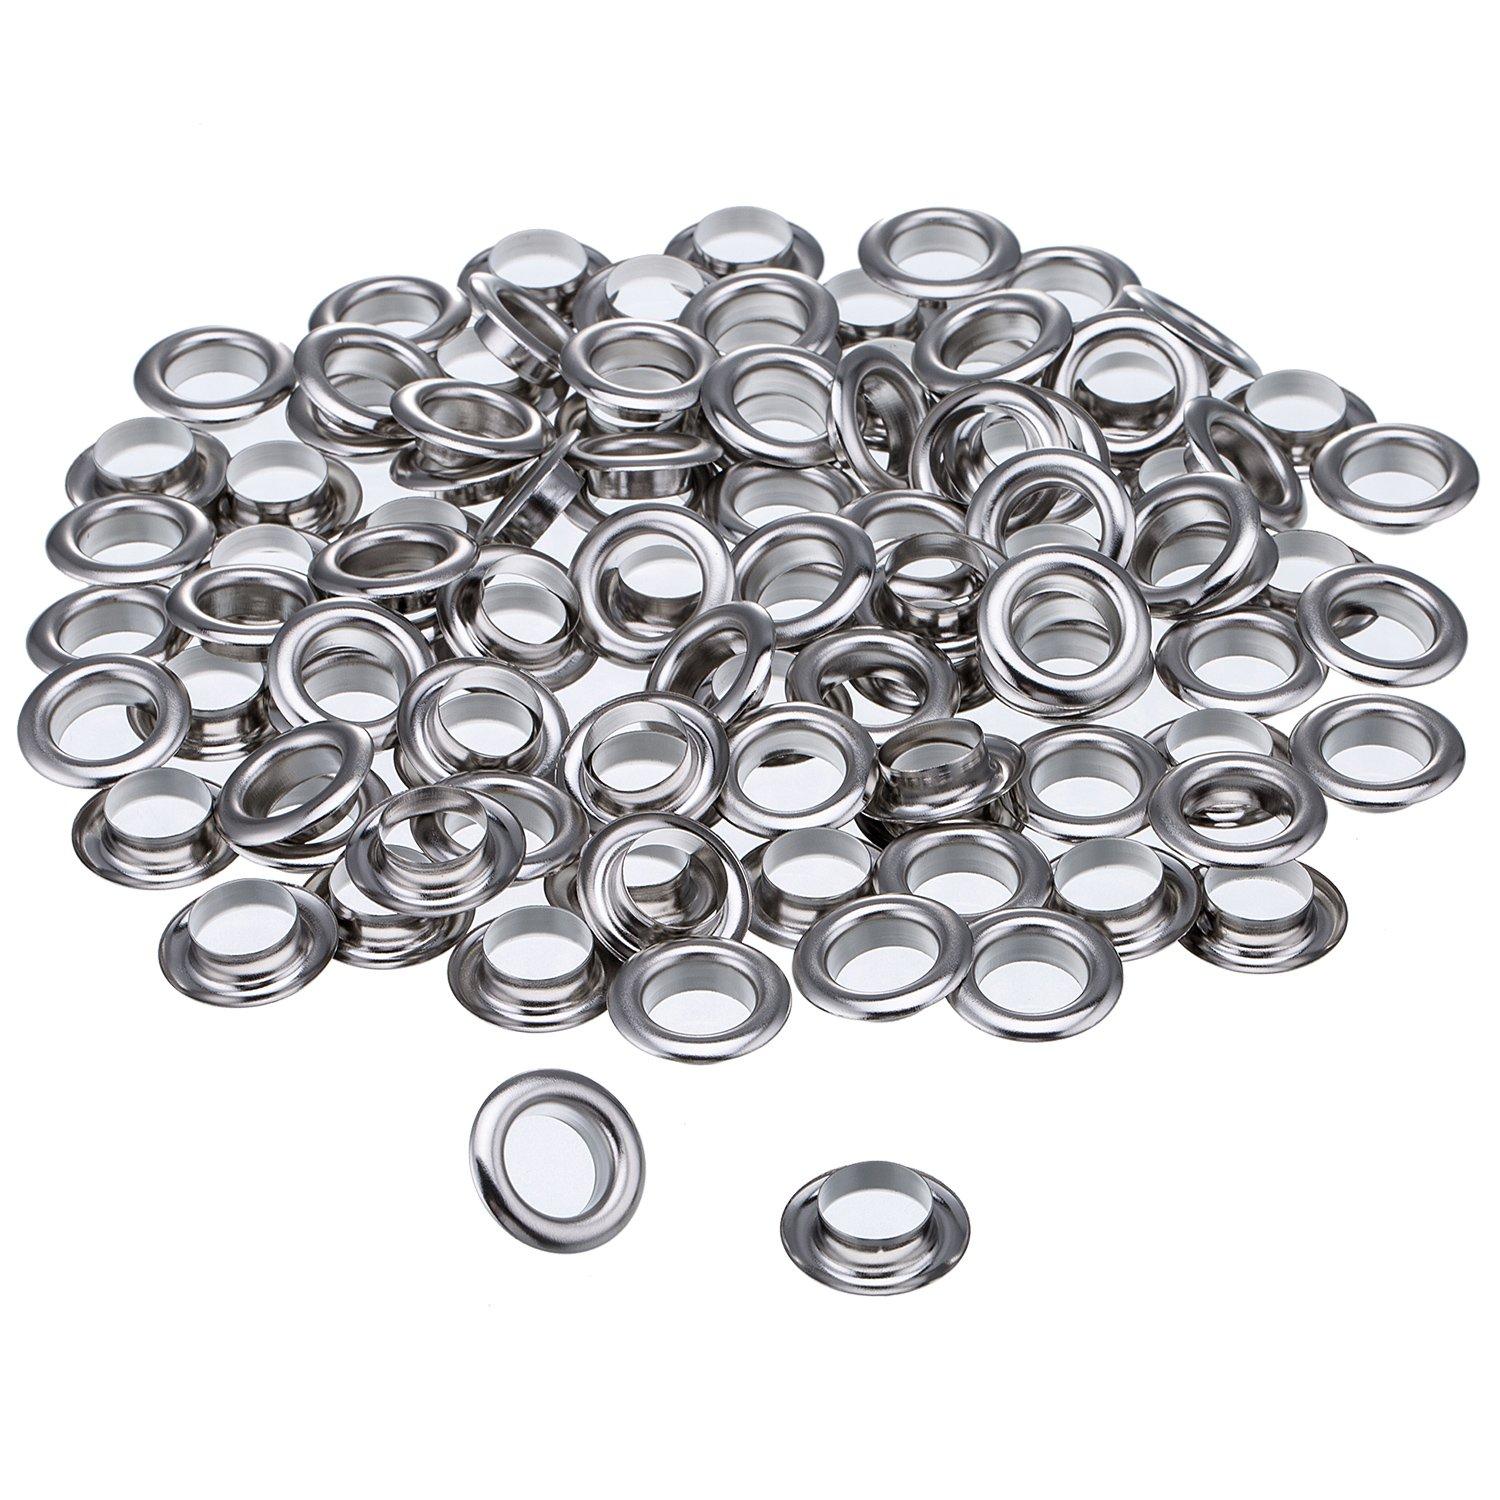 1/4 Inch Grommet Kit 200 Sets Grommets Eyelets with India